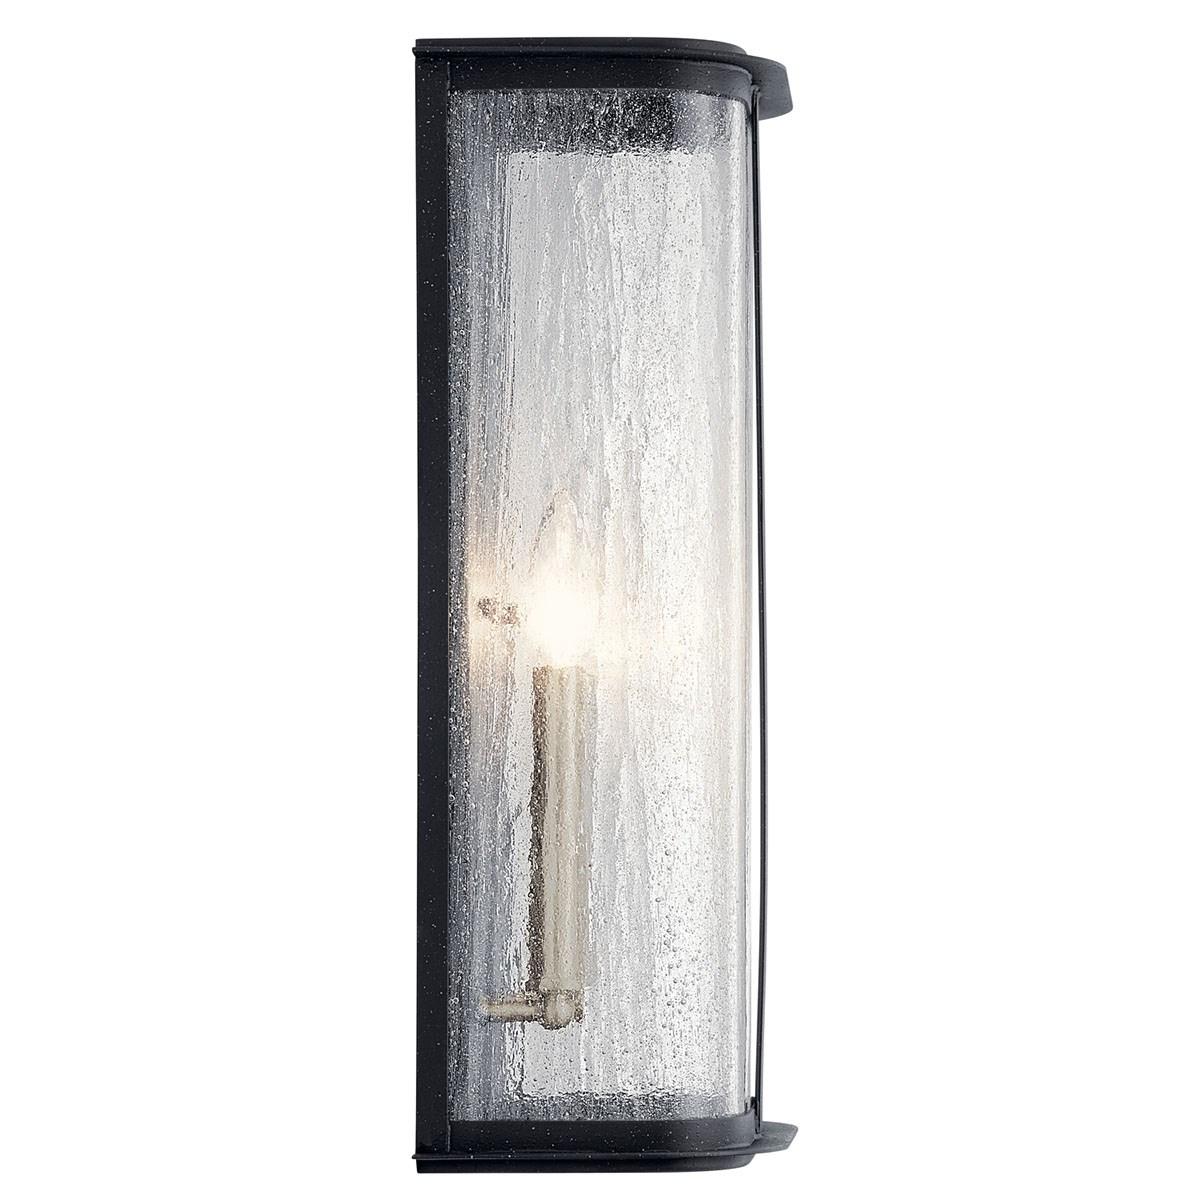 Timmin 18 in. 2 Lights Outdoor Wall Sconce Black Finish